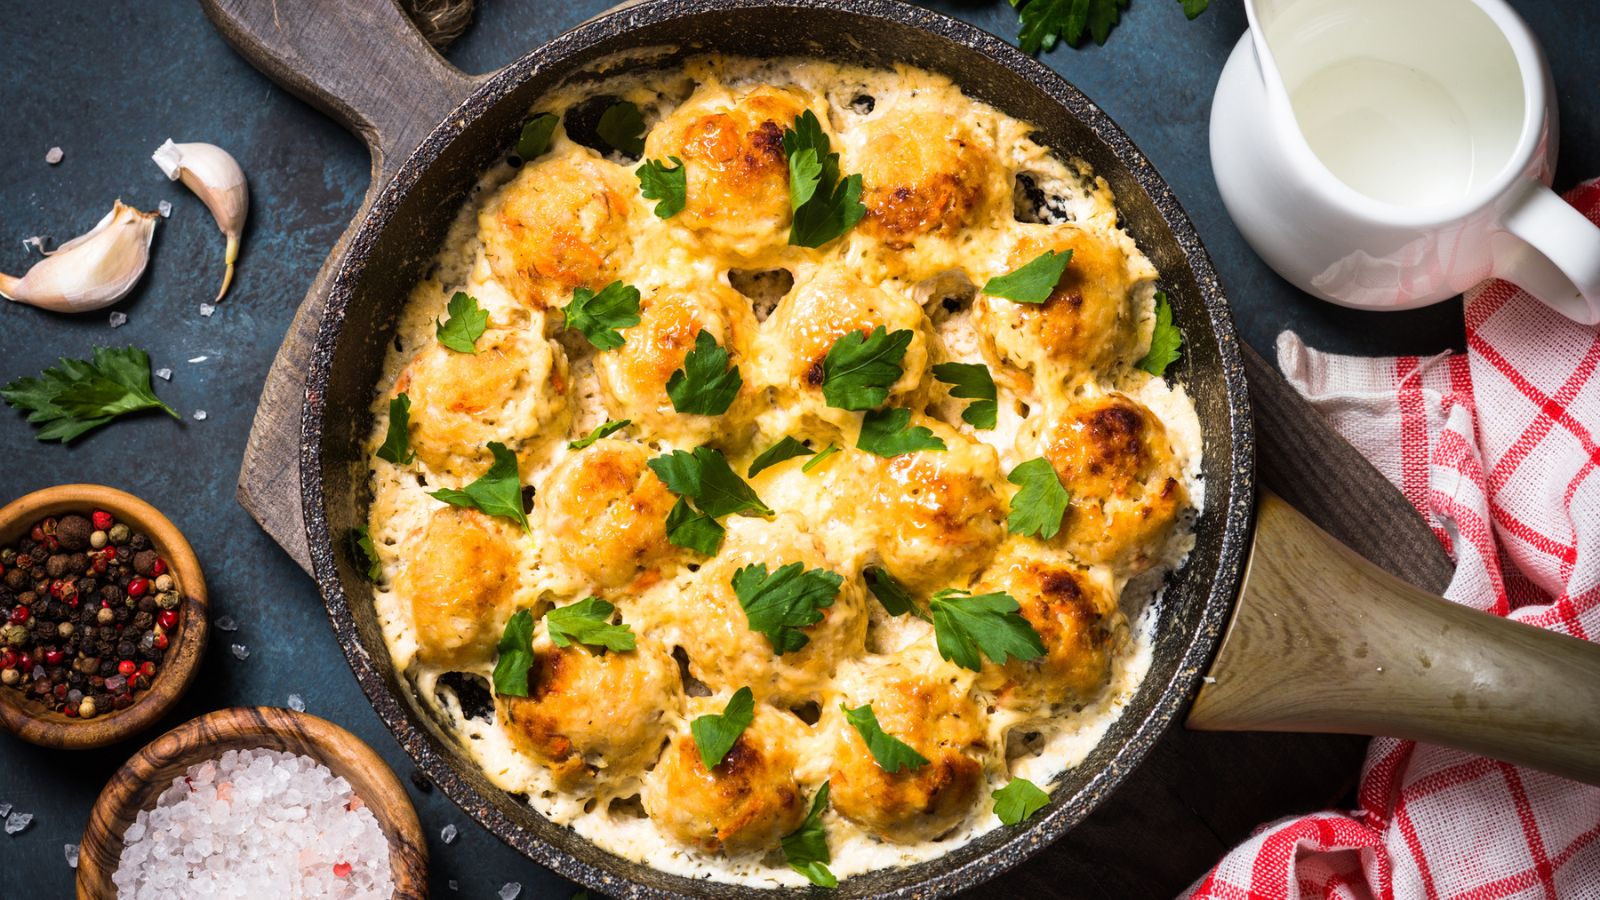 20 Cauliflower Recipes: The Delicious Route to Your Family’s Health